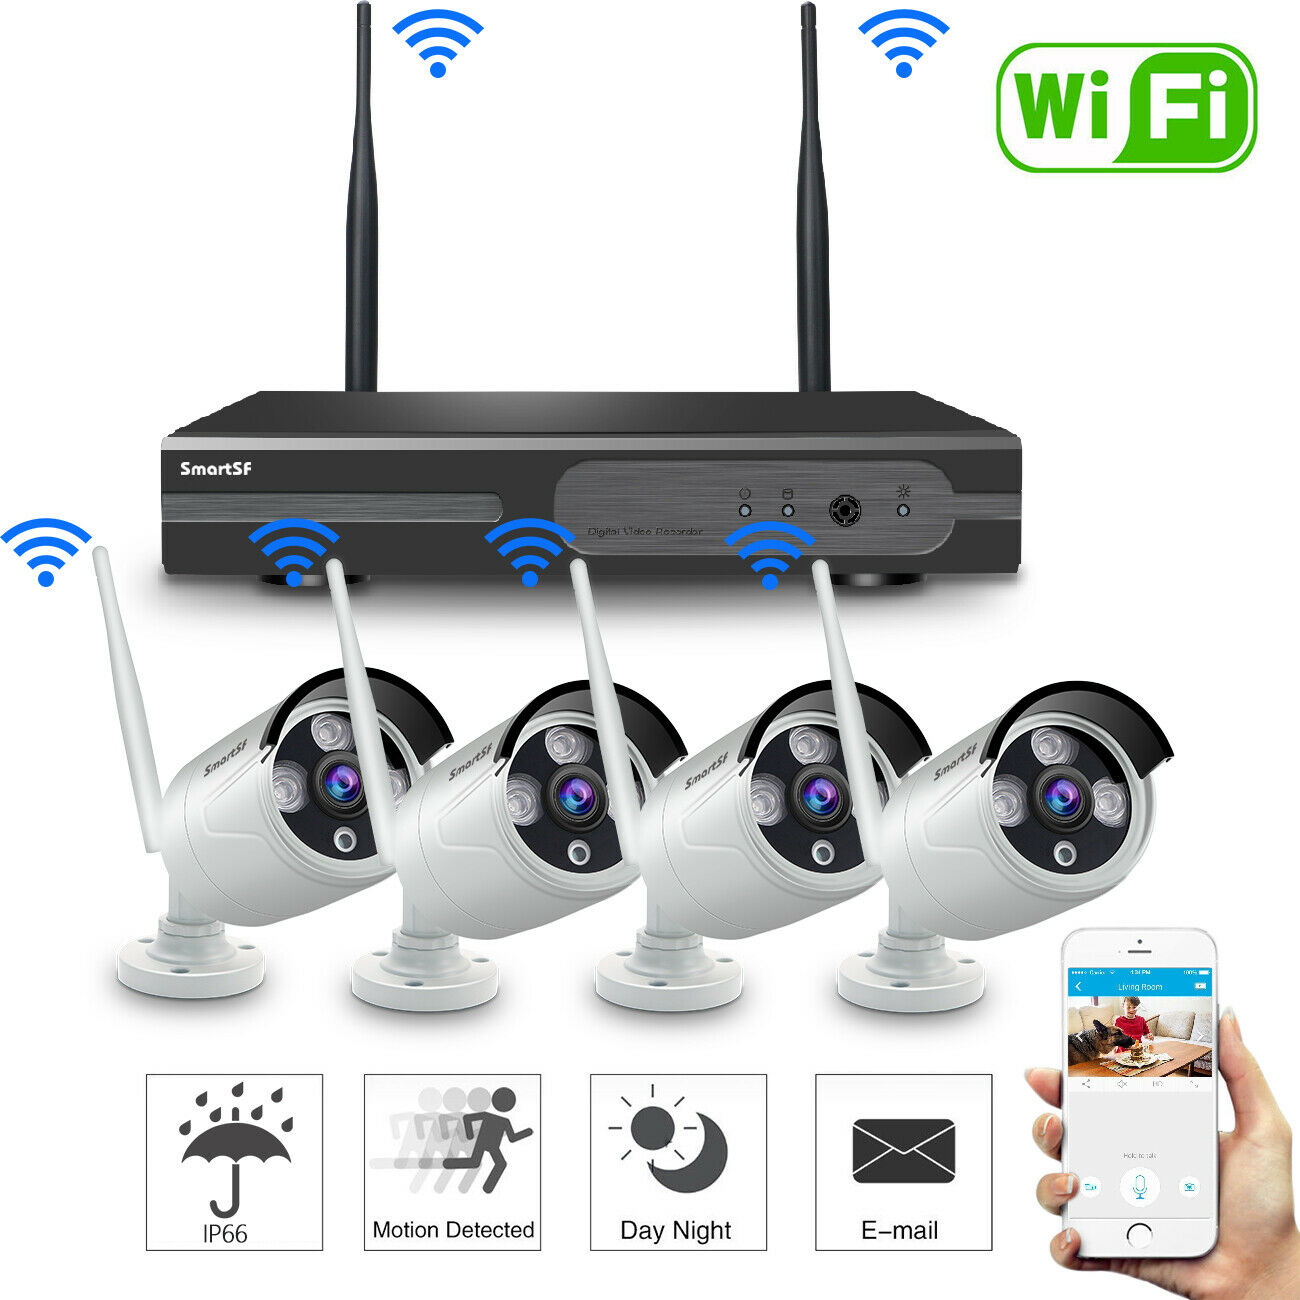 Smartsf 8ch 1080p Nvr Wireless Security Camera System Indoor Outdoor Wifi Cctv